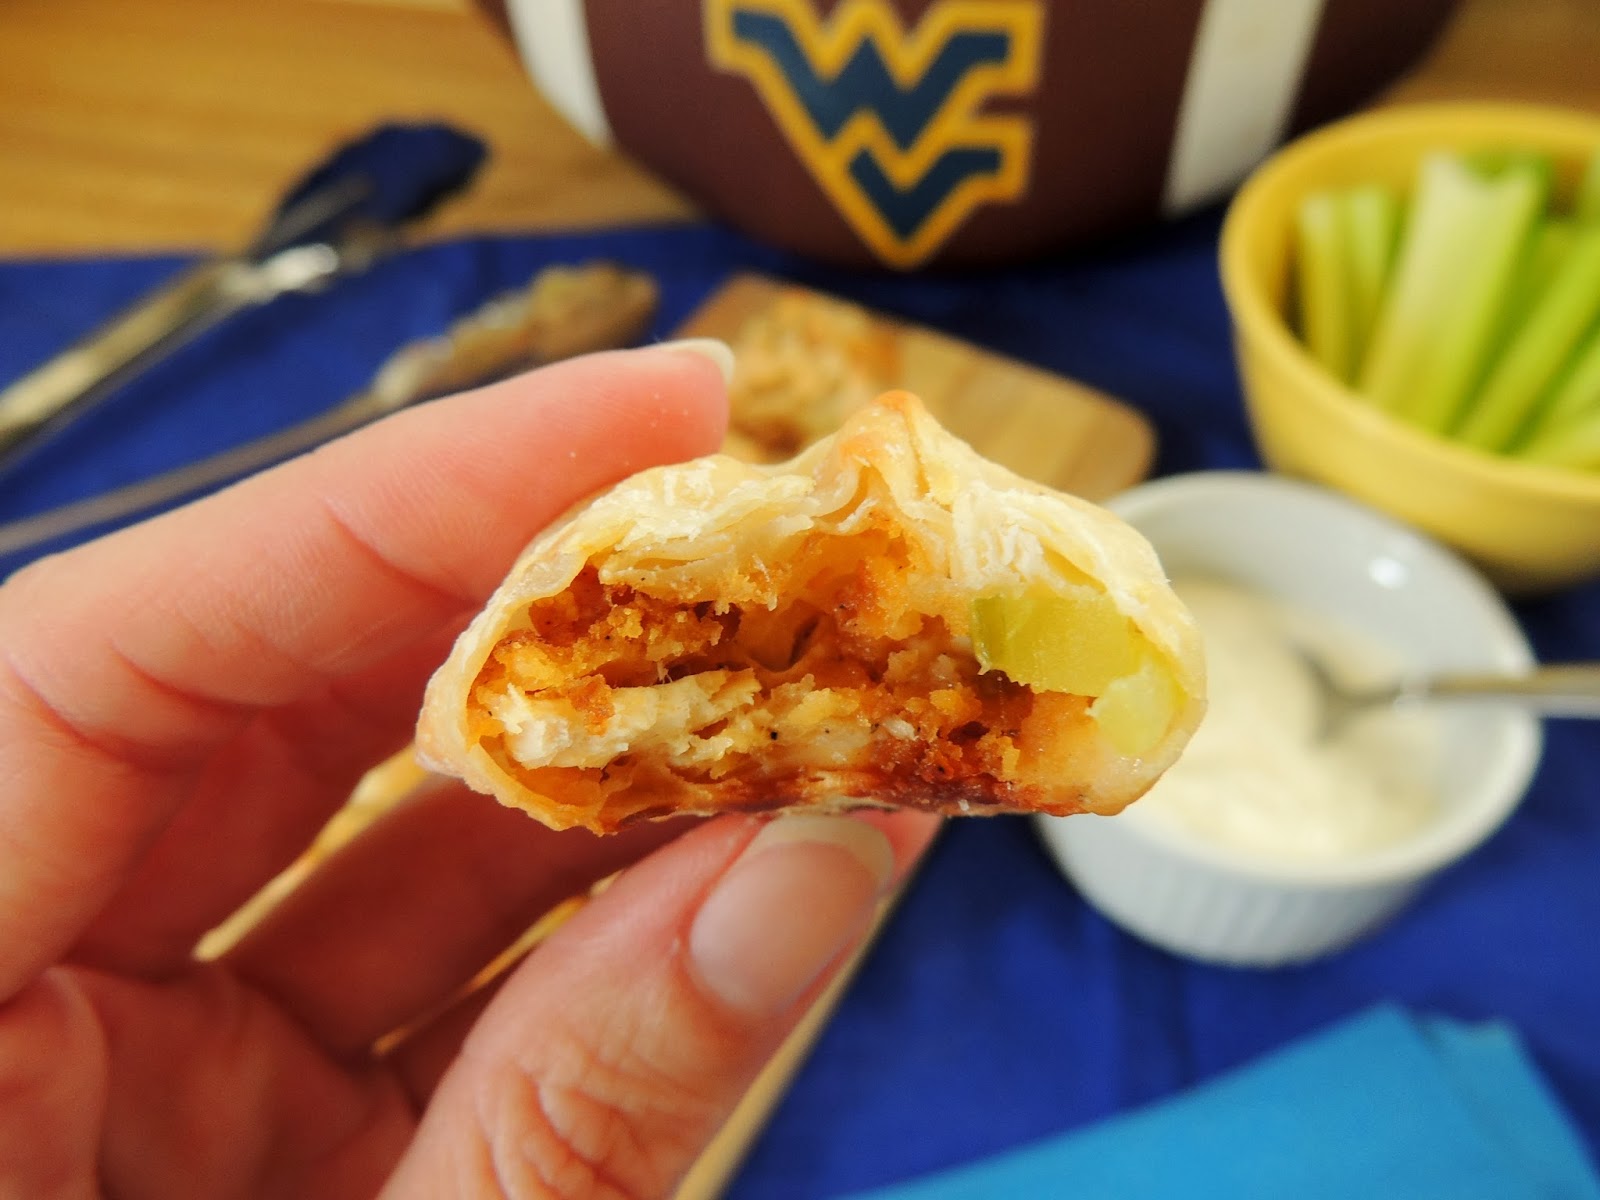 Finger foods are a fantastic way to allow guests to chow down while enjoying tailgating games